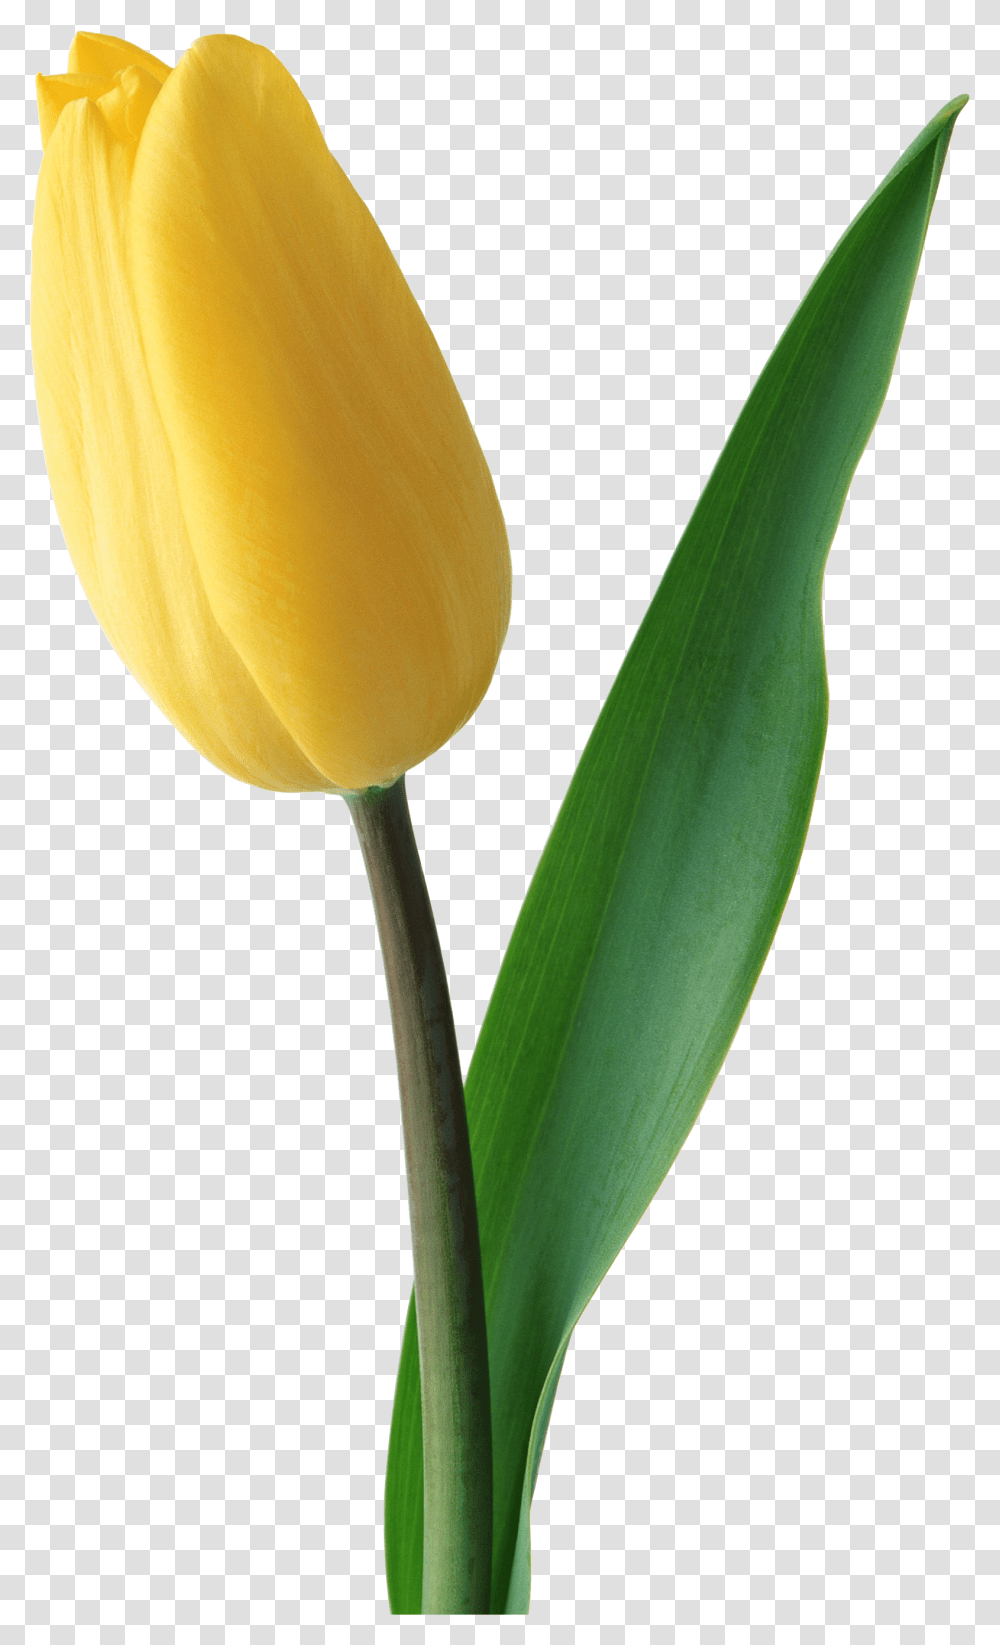 Tulips Are Red Yellow Tulips Flower, Plant, Blossom Transparent Png